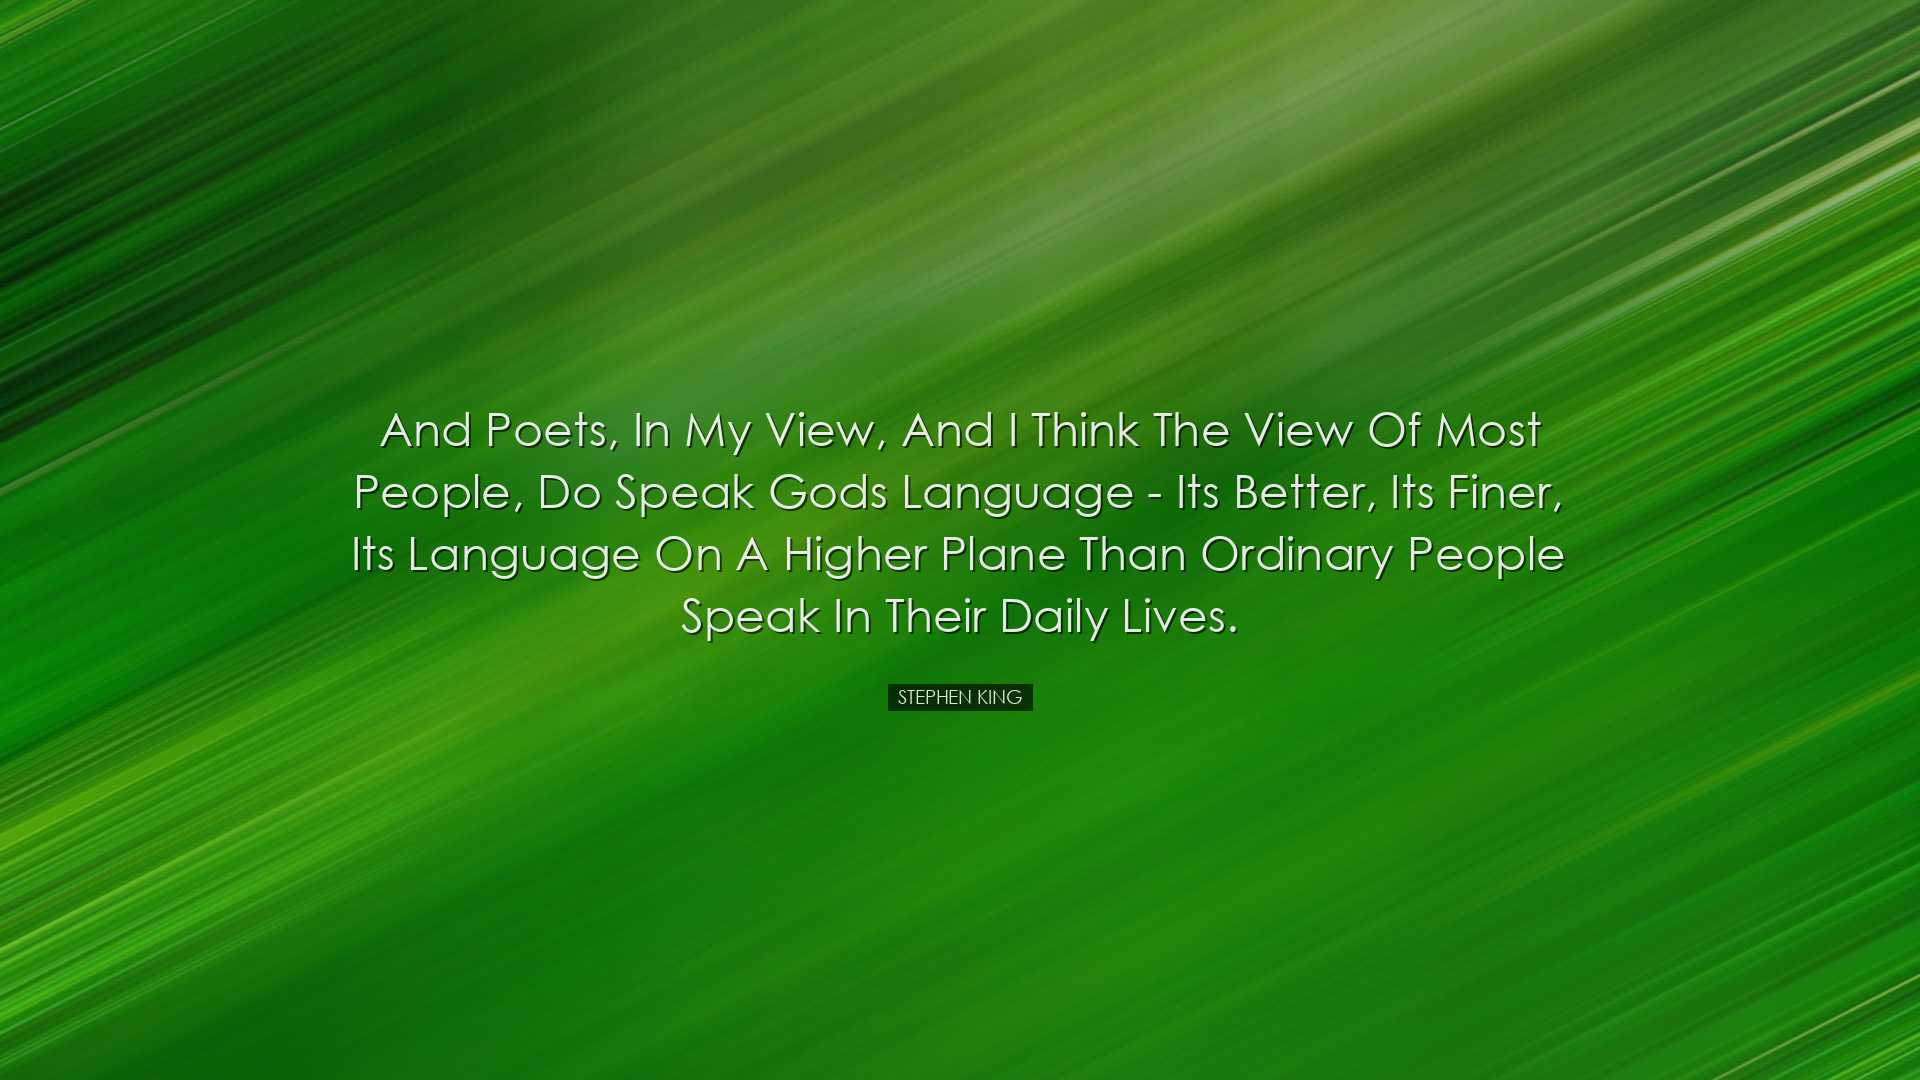 And poets, in my view, and I think the view of most people, do spe